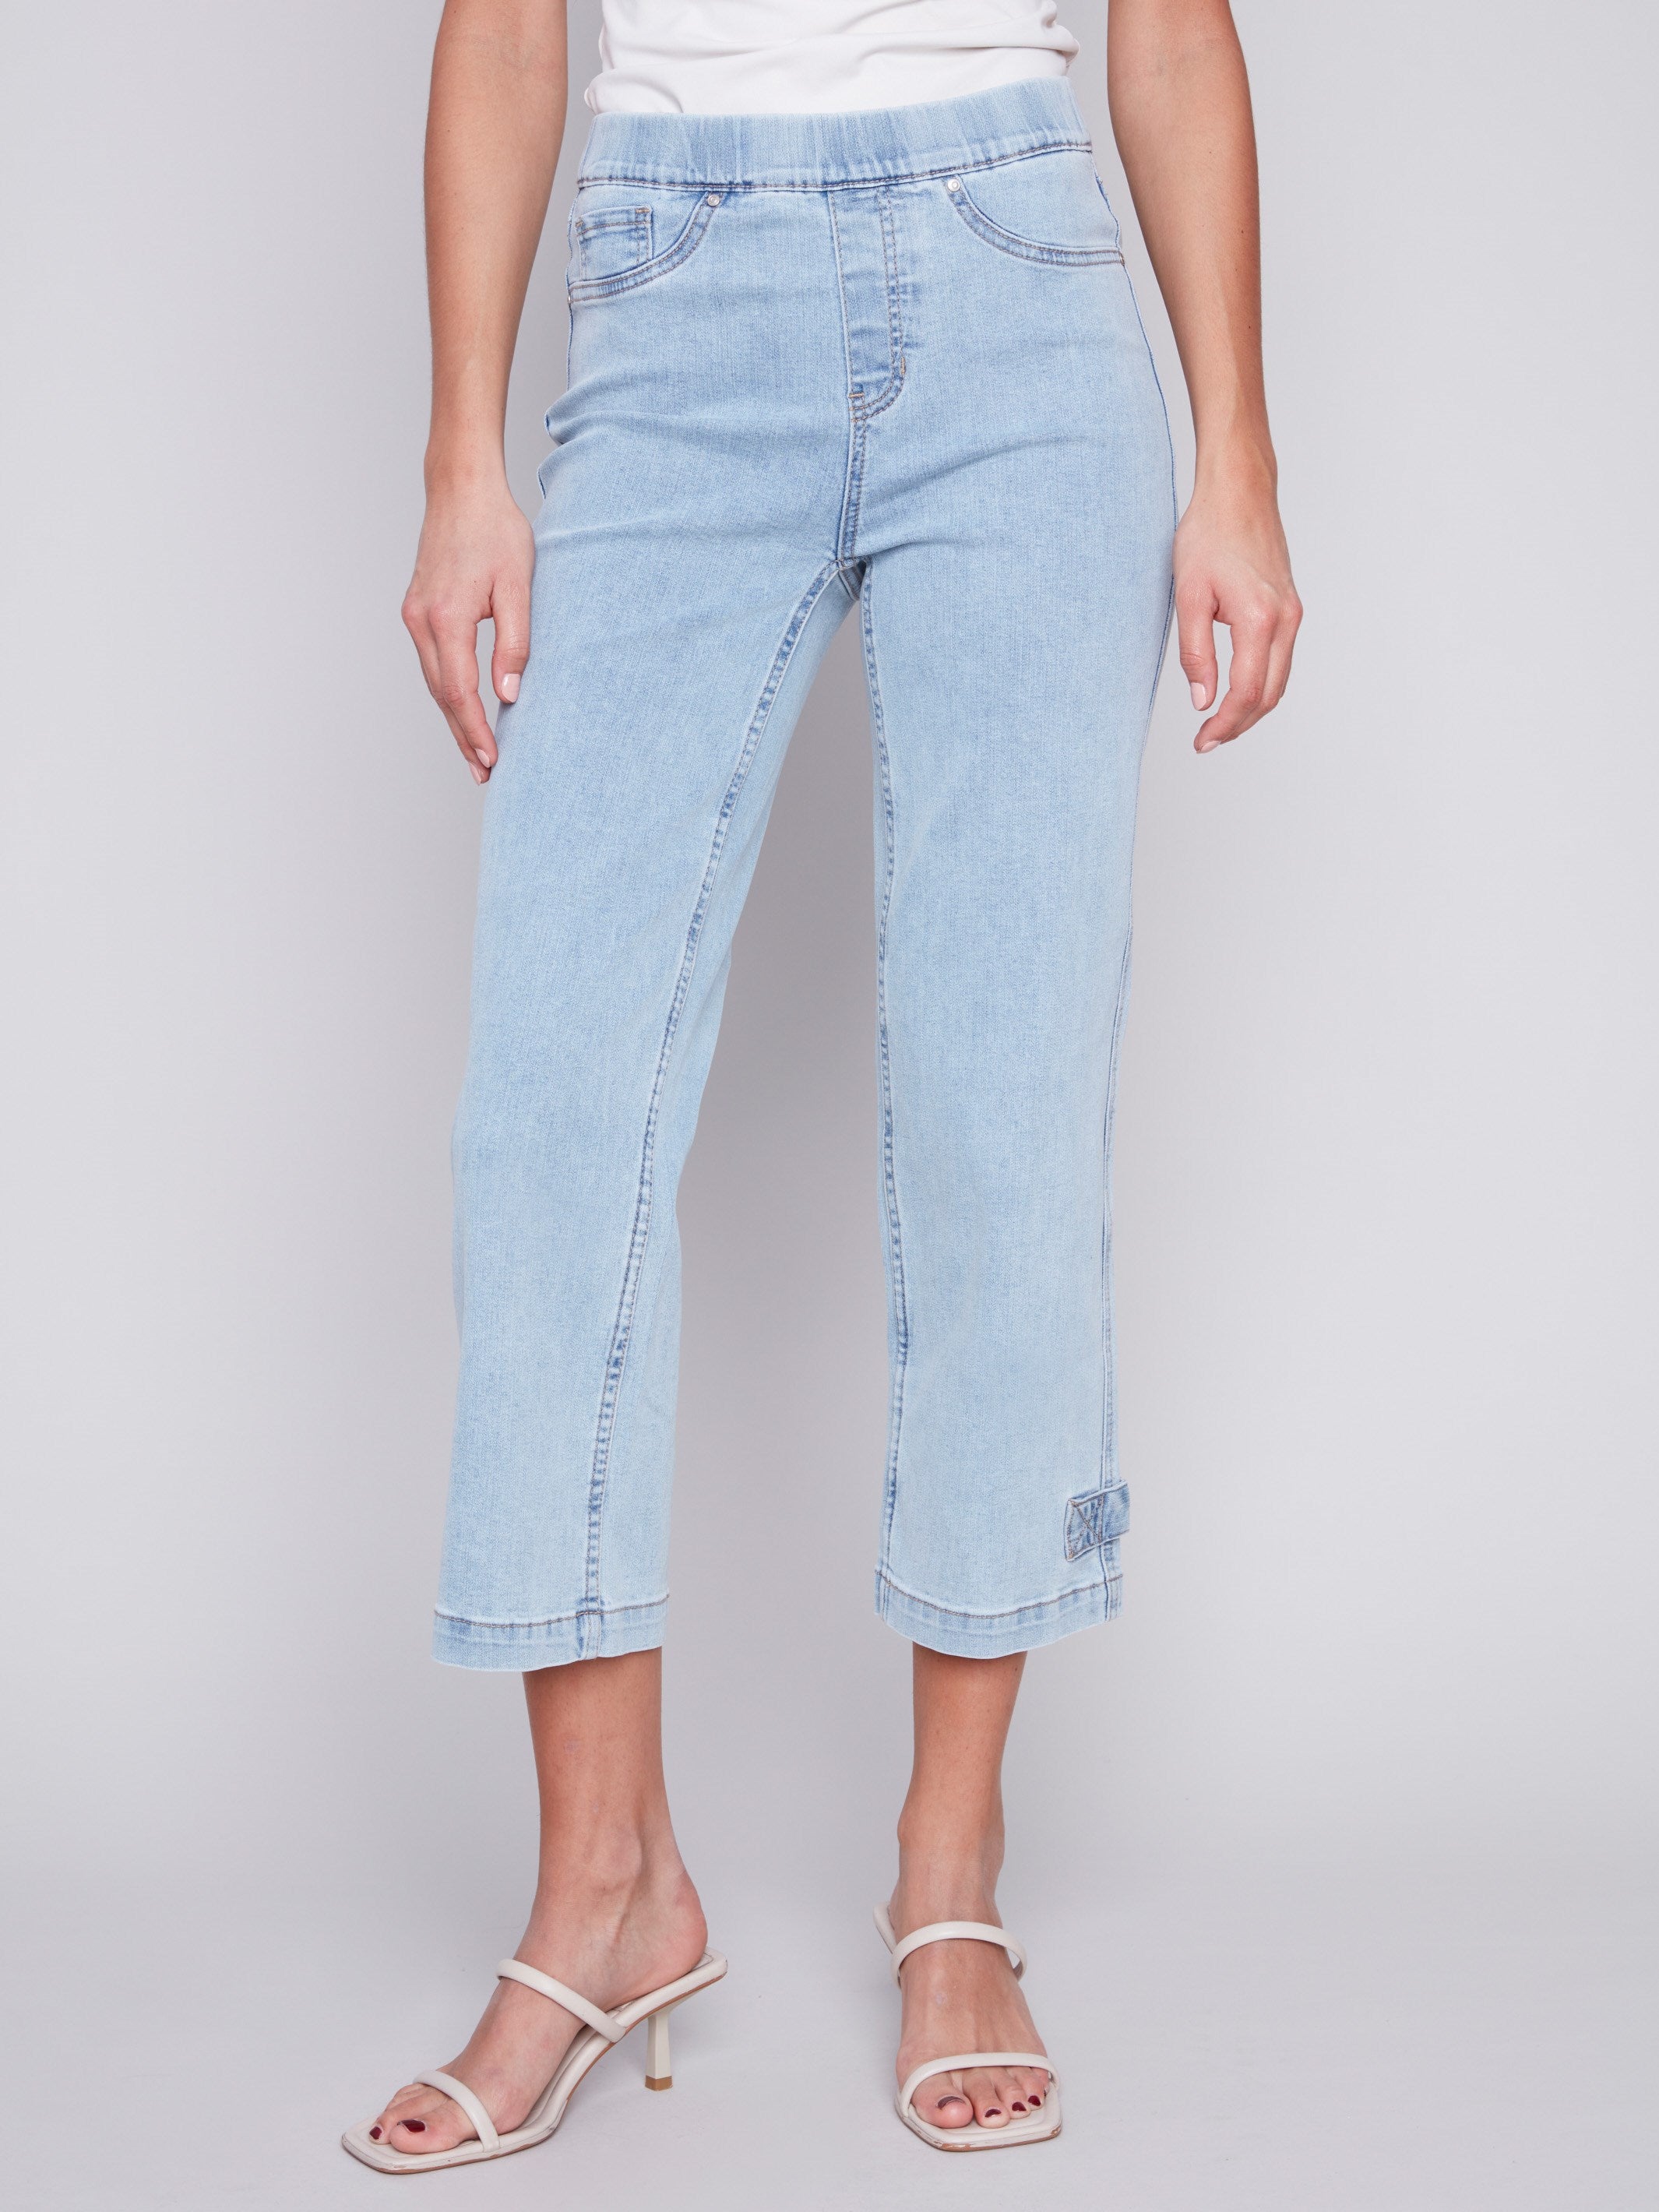 Cropped Pull-On Jeans with Hem Tab - Bleach Blue - Charlie B Collection Canada - Image 2